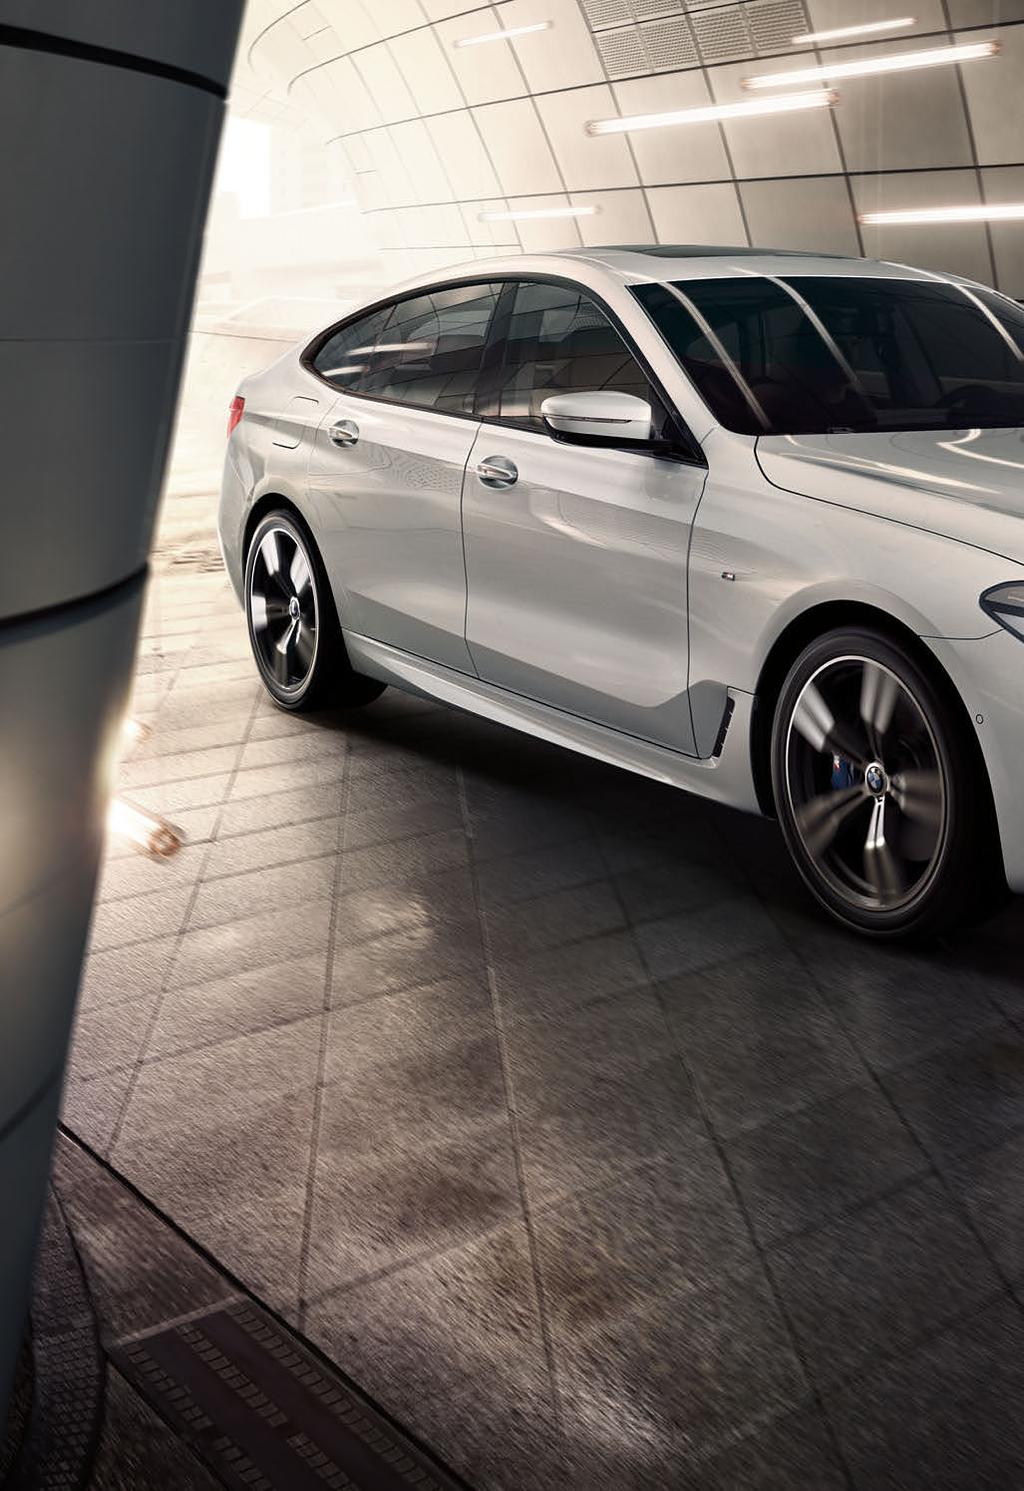 THE NEW BMW 6 SERIES GRAN TURISMO HAS EARNT ITS NAME IT COMBINES AN EXCEPTIONALLY SPACIOUS INTERIOR WITH MAXIMUM